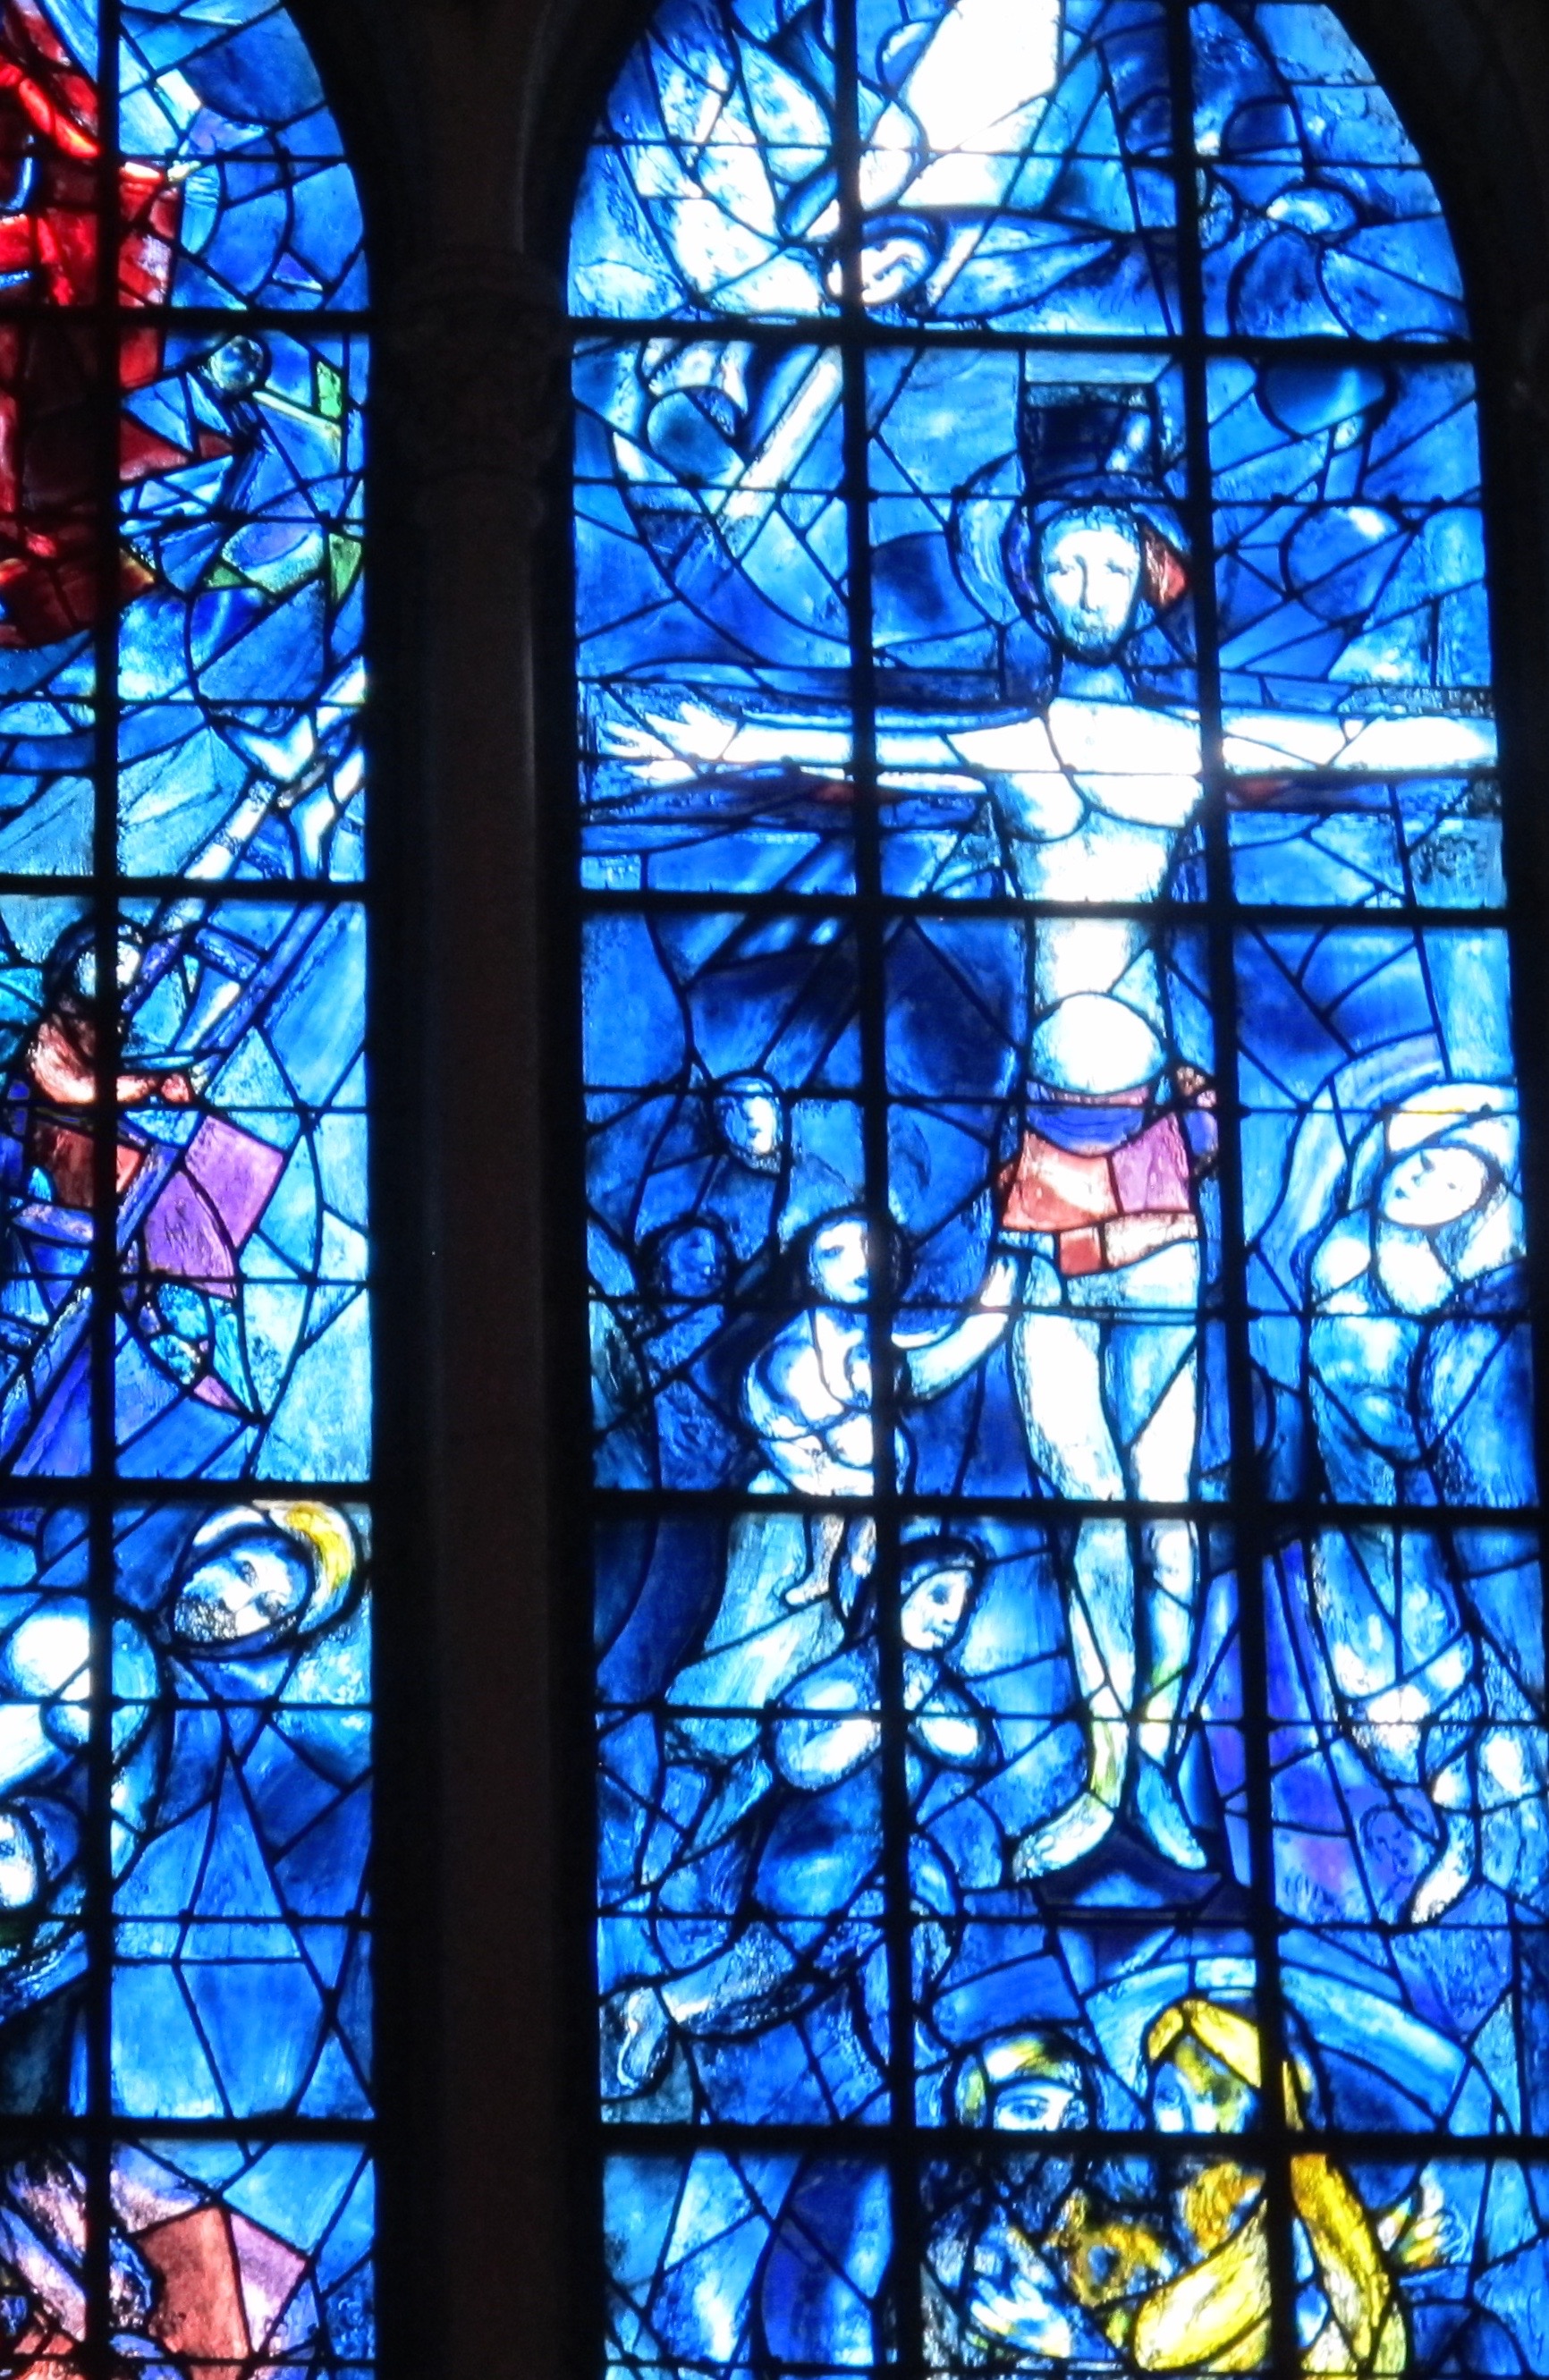 Satained glass windows by Marc Chagall.